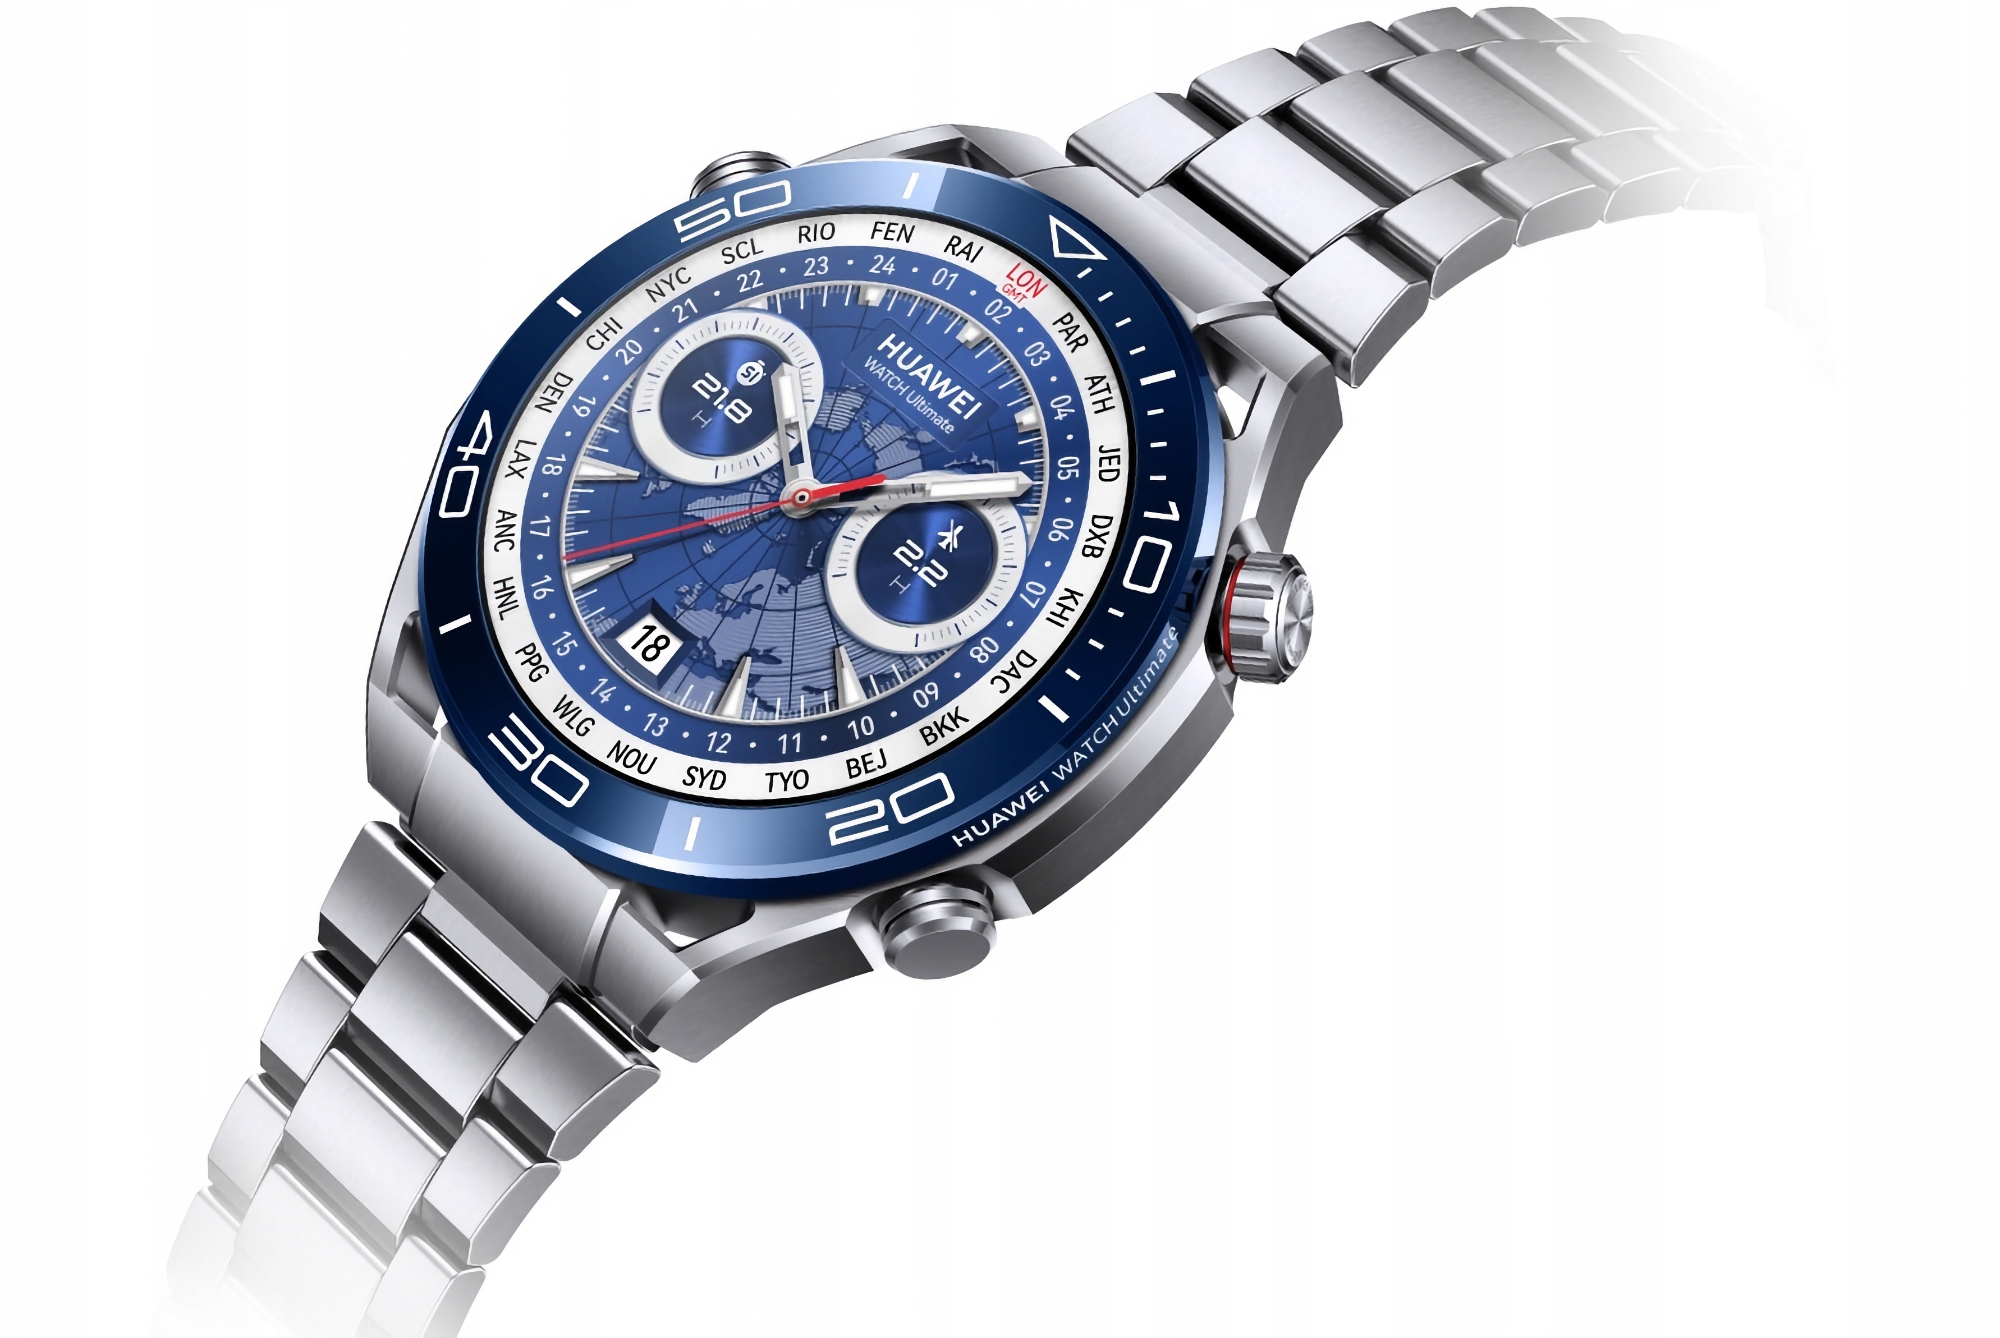 Huawei Watch Ultimate users in the global market have started receiving HarmonyOS 4